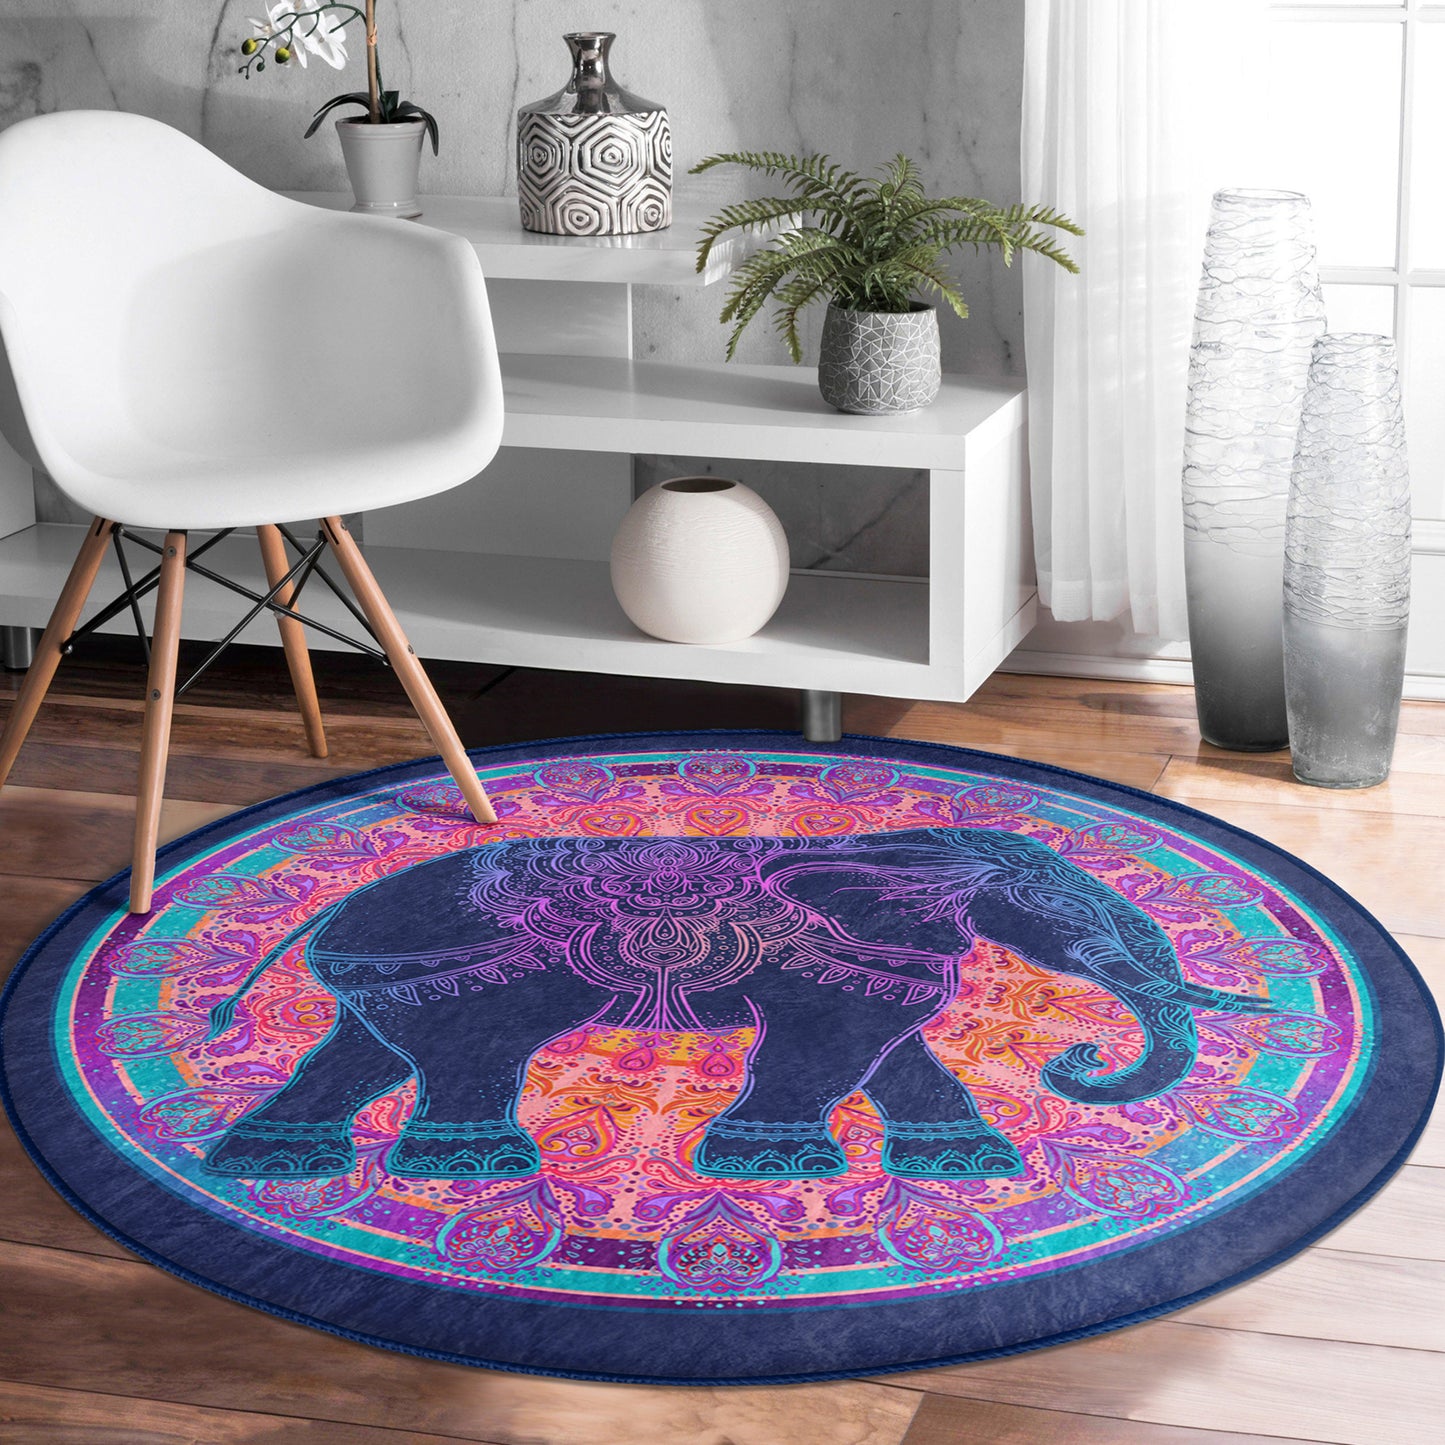 Whimsical Elephant Pattern Bohemian Rug - Eclectic Design